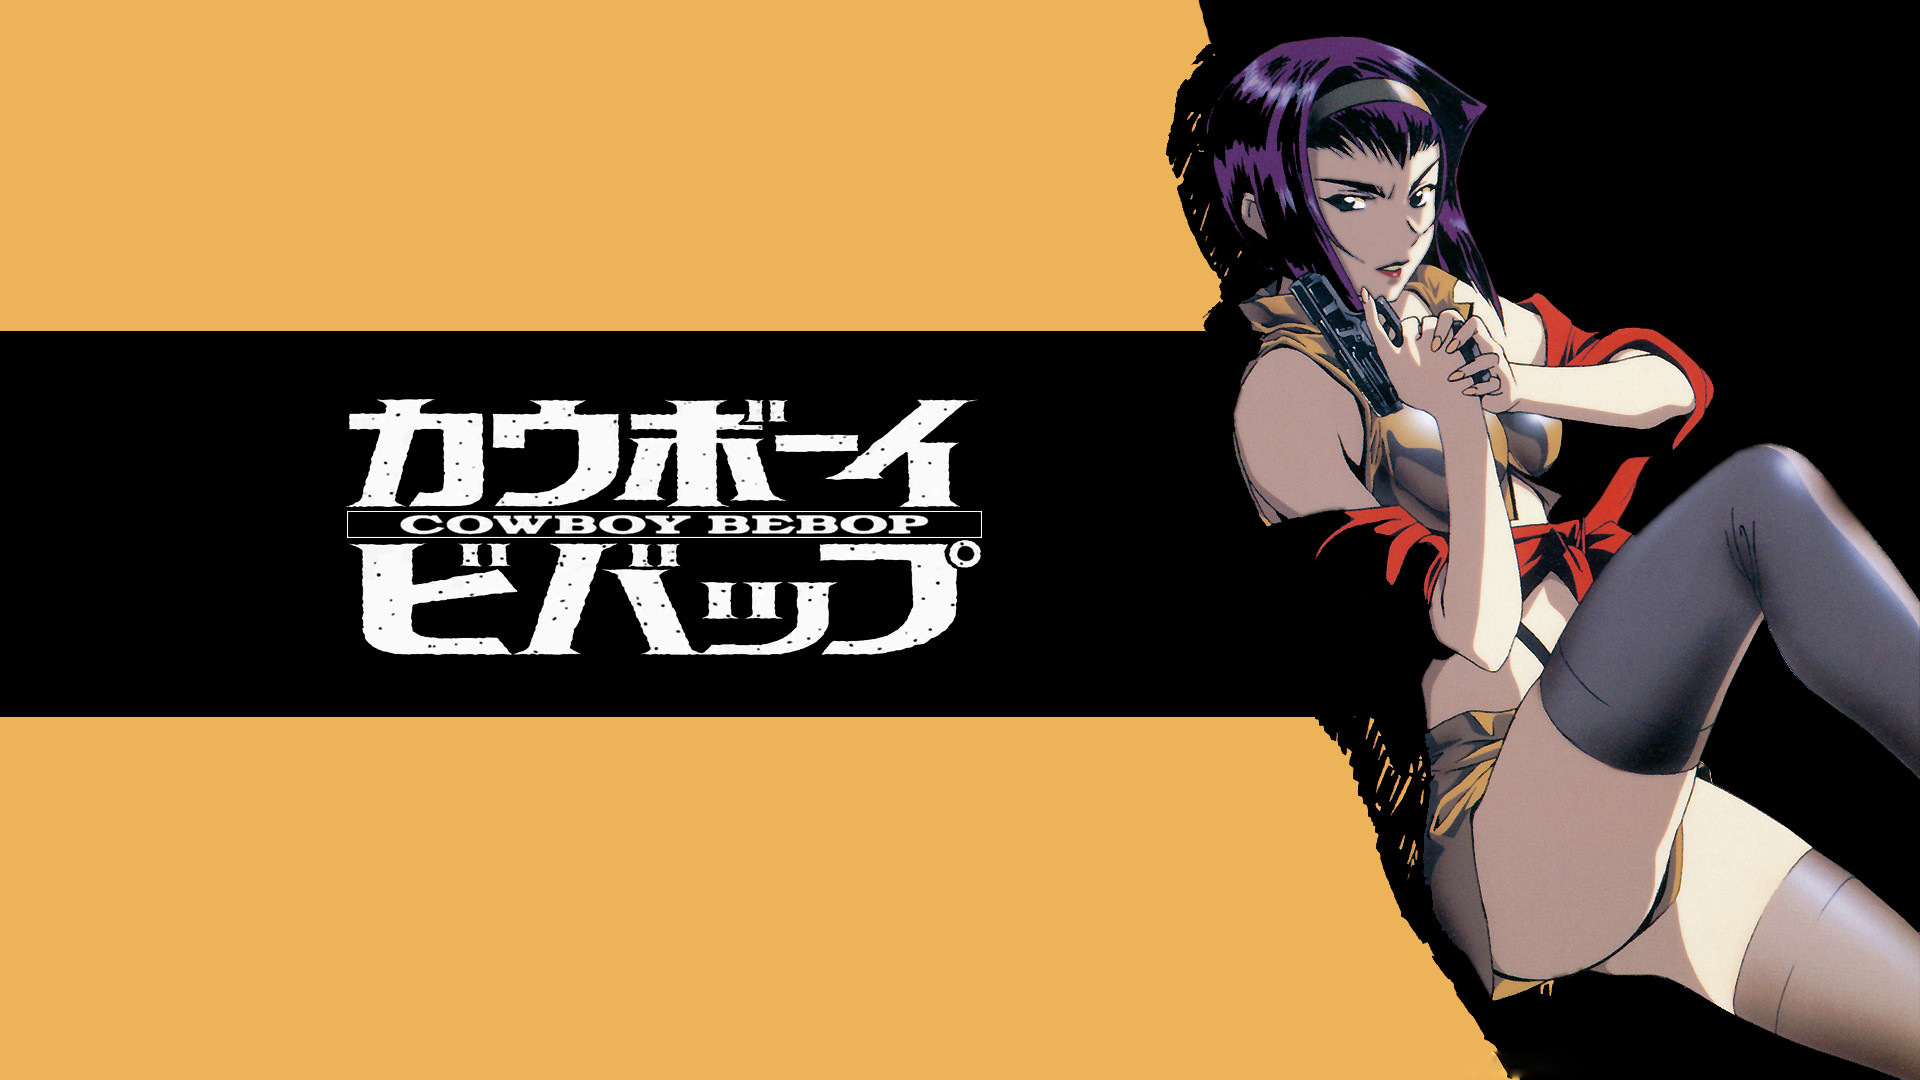 1920x1080 299 Cowboy Bebop HD Wallpapers | Backgrounds - Wallpaper Abyss ...